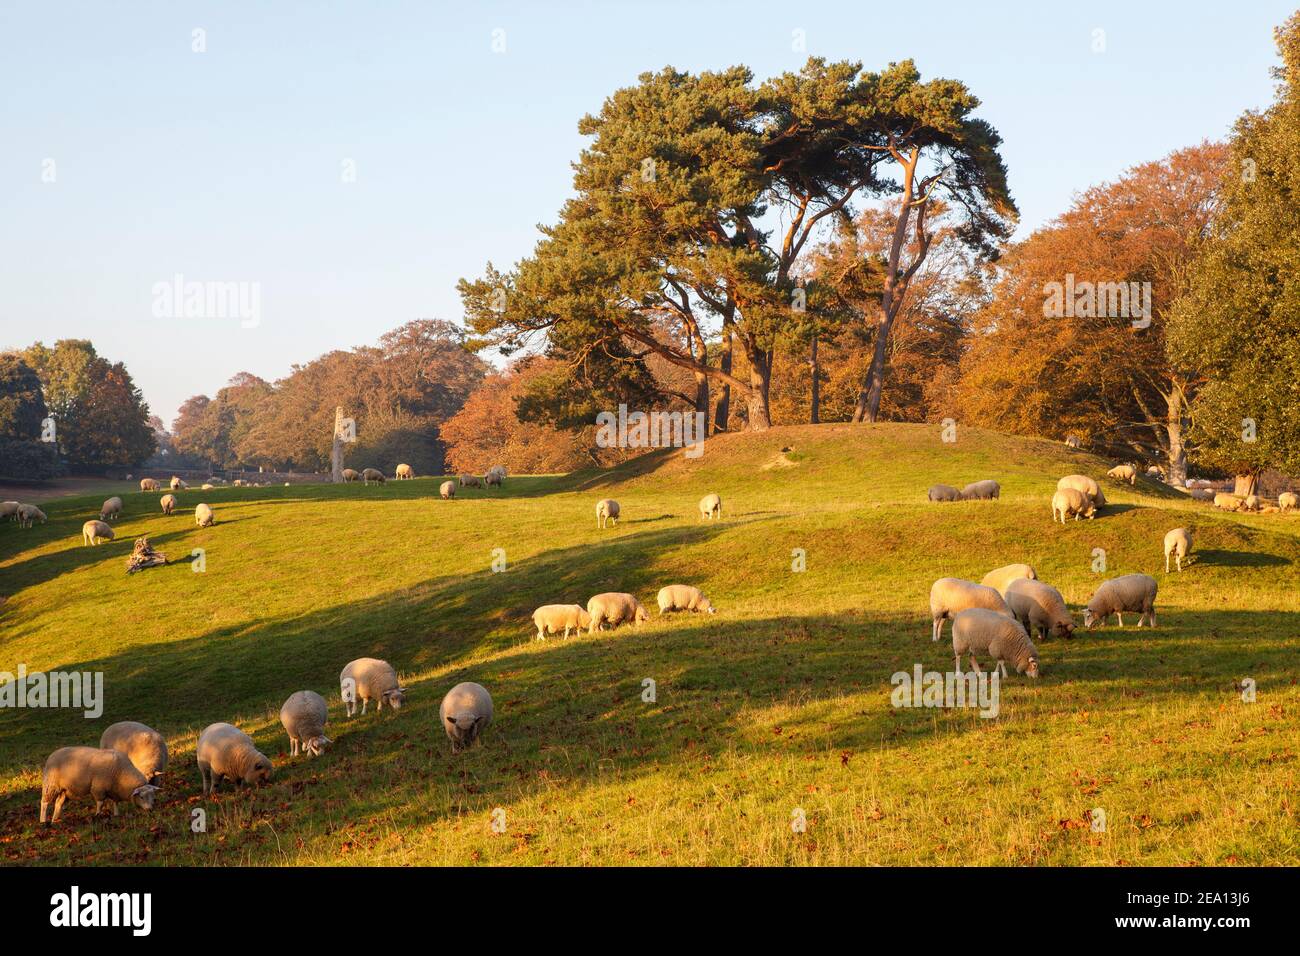 Sheep grazing in a field at Winchelsea, East Sussex, UK Stock Photo